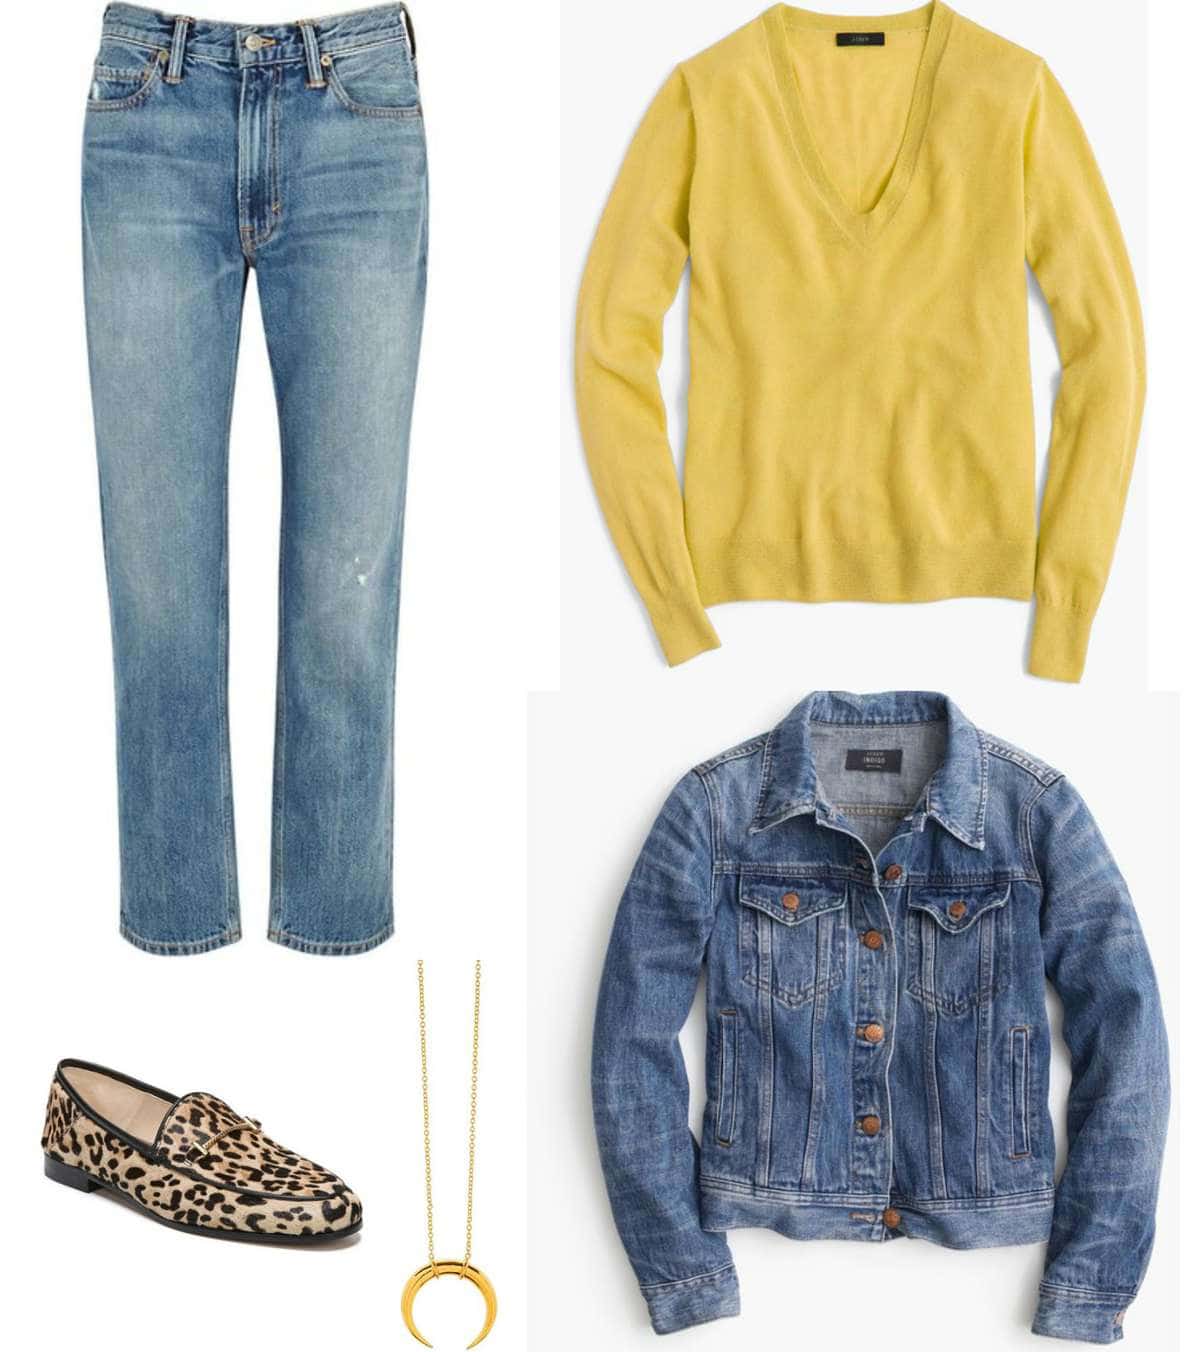 Denim on denim is a hot trend; no need to try to match or drastically contrast your washes.